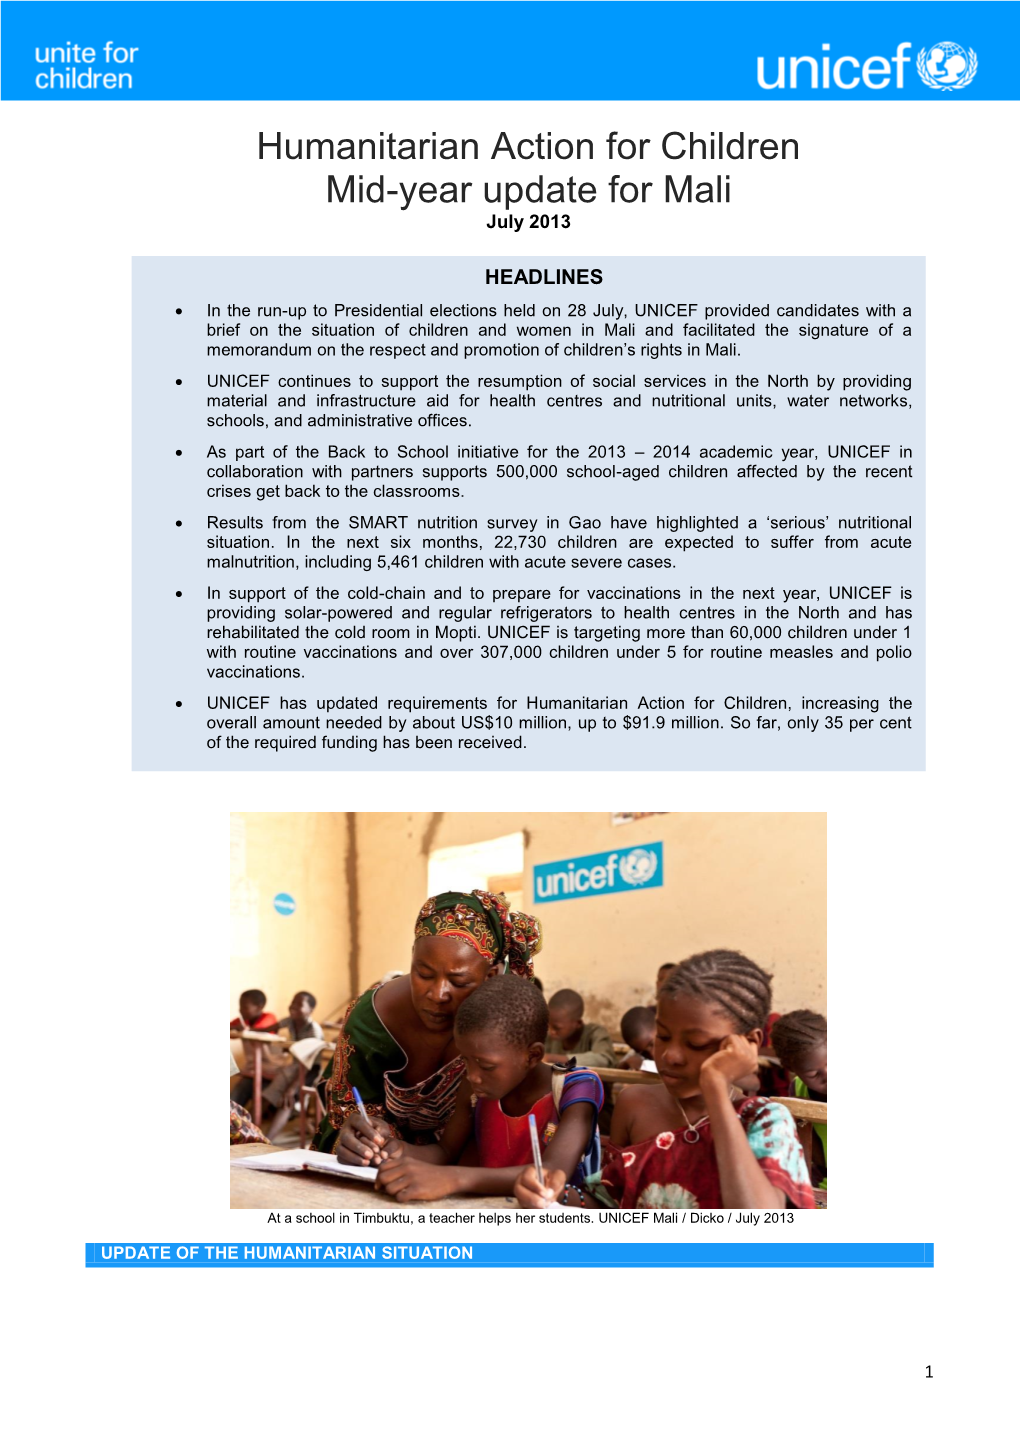 Humanitarian Action for Children Mid-Year Update for Mali July 2013